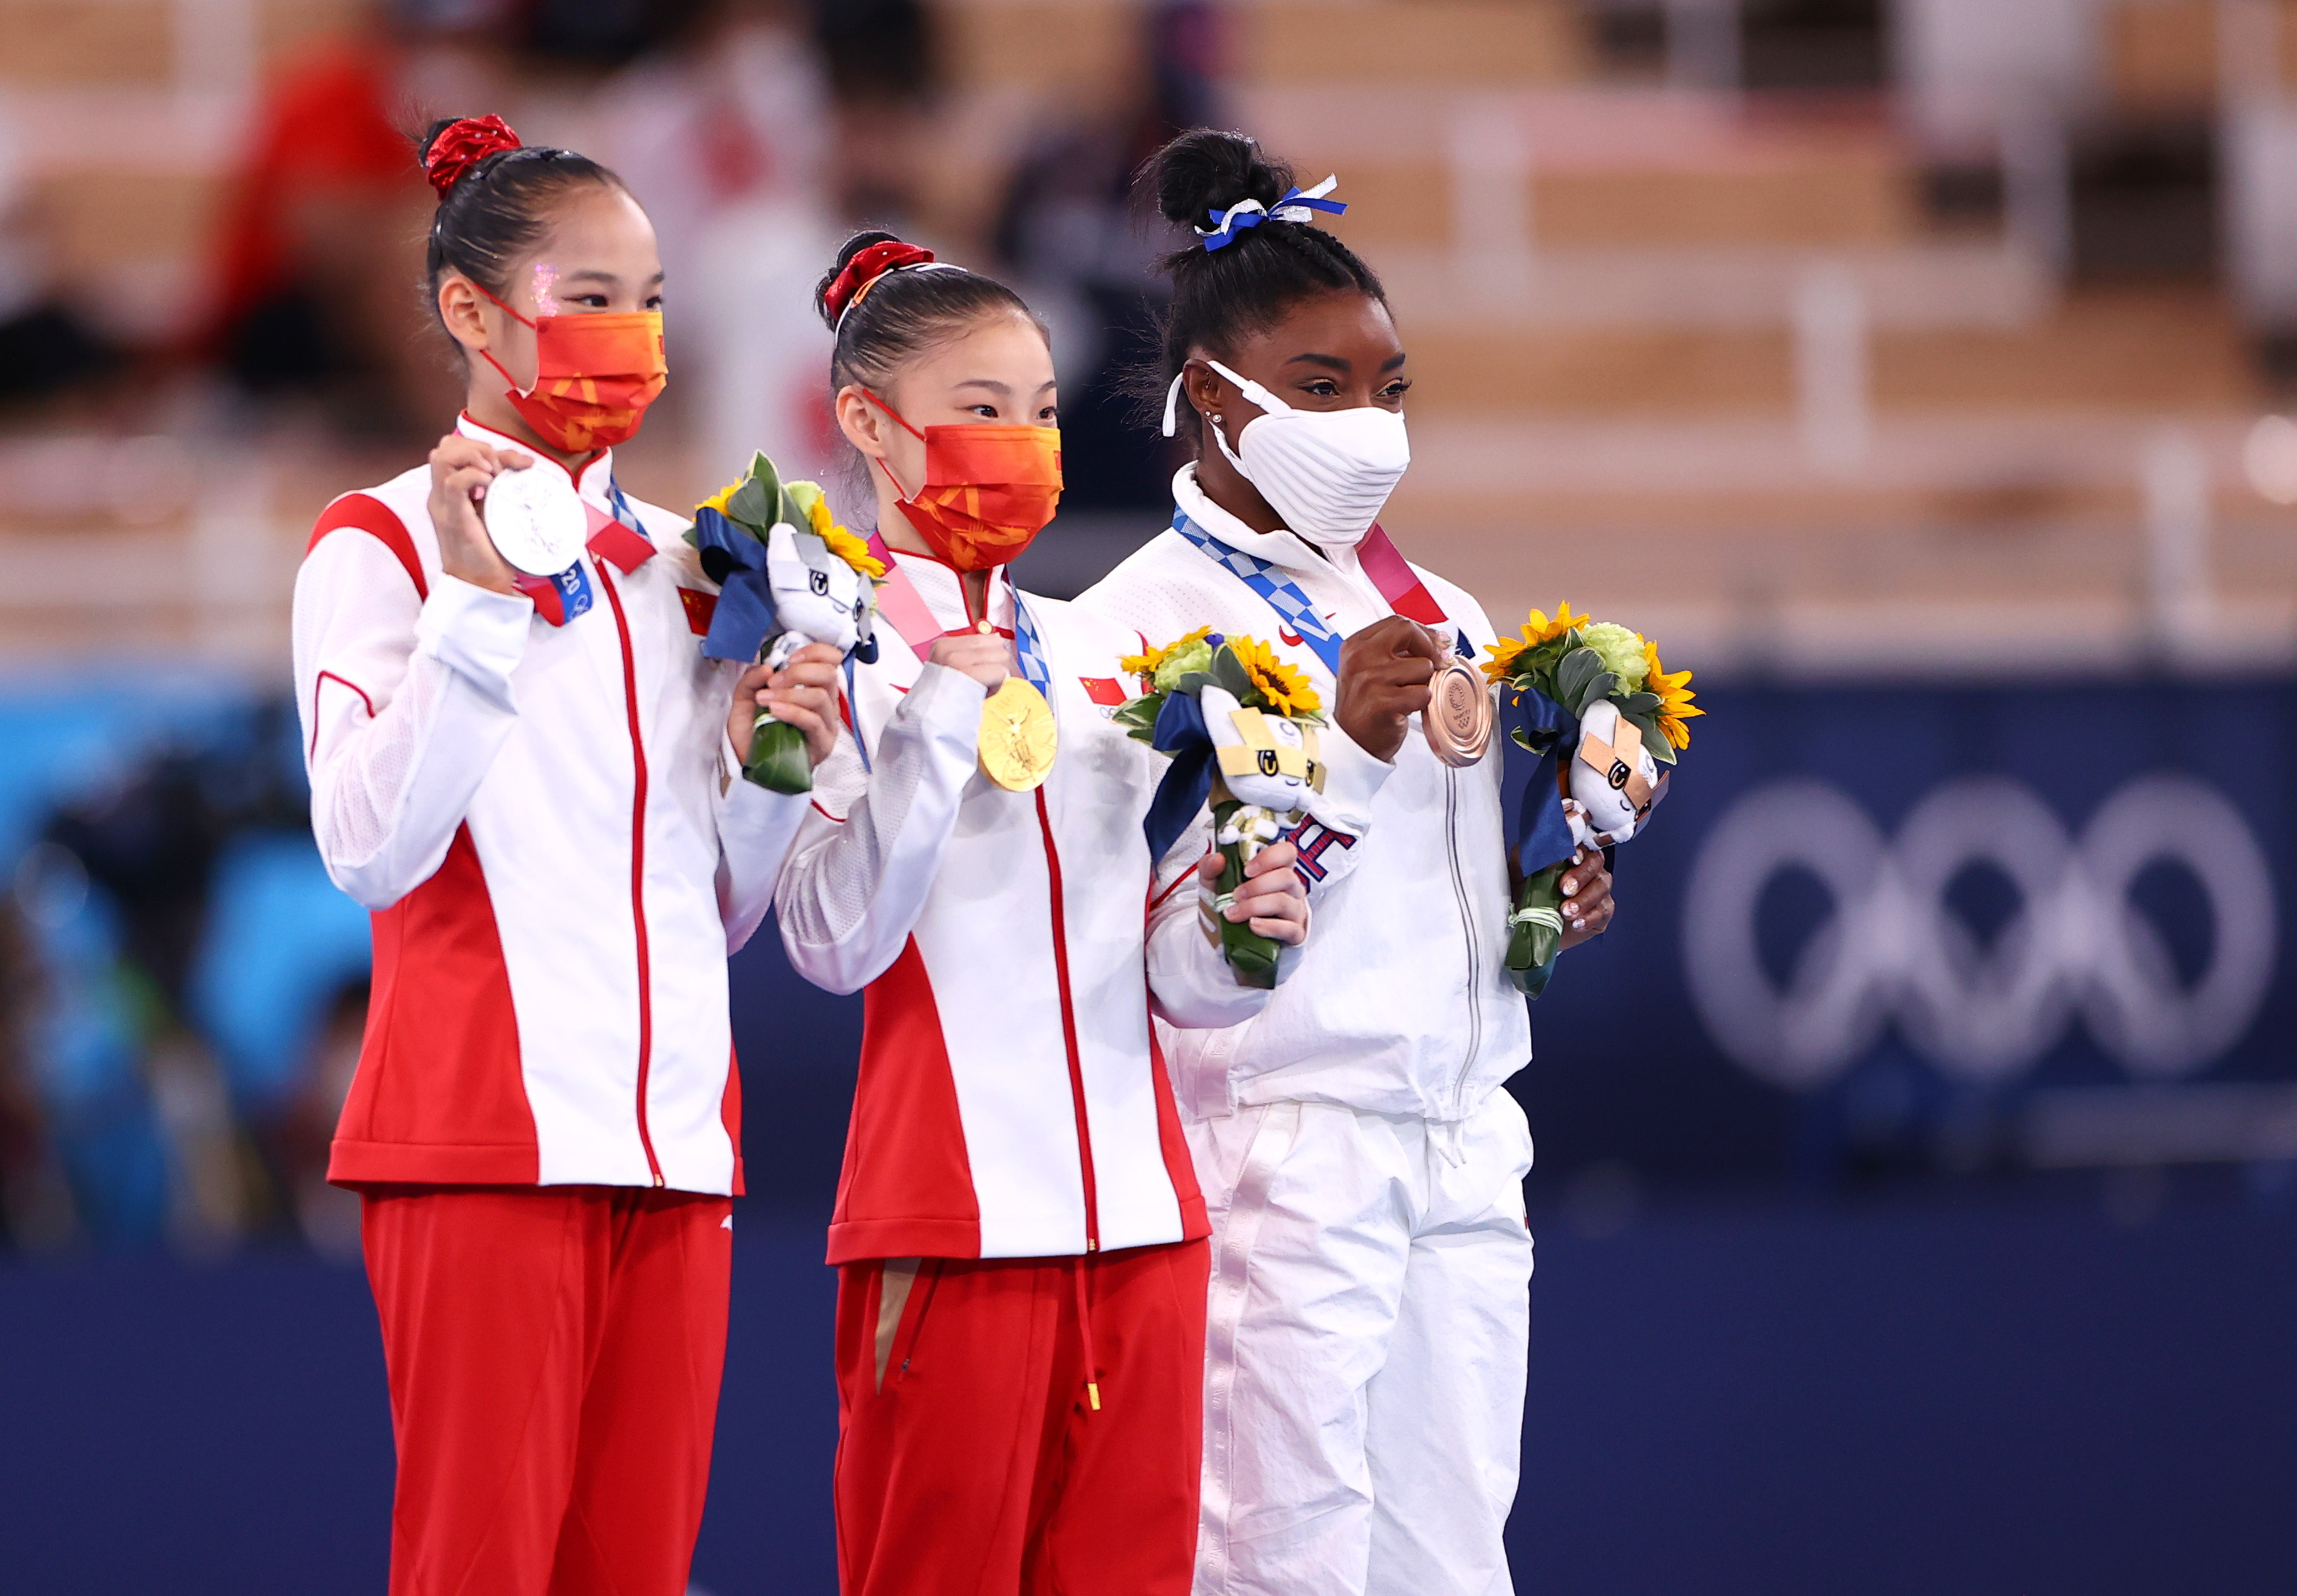 Gold medalist Guan Chenchen of China, center, celebrates on the podium with silver medalist, Tang Xijing, also of China, left, and bronze medalist Simone Biles of the United States. 